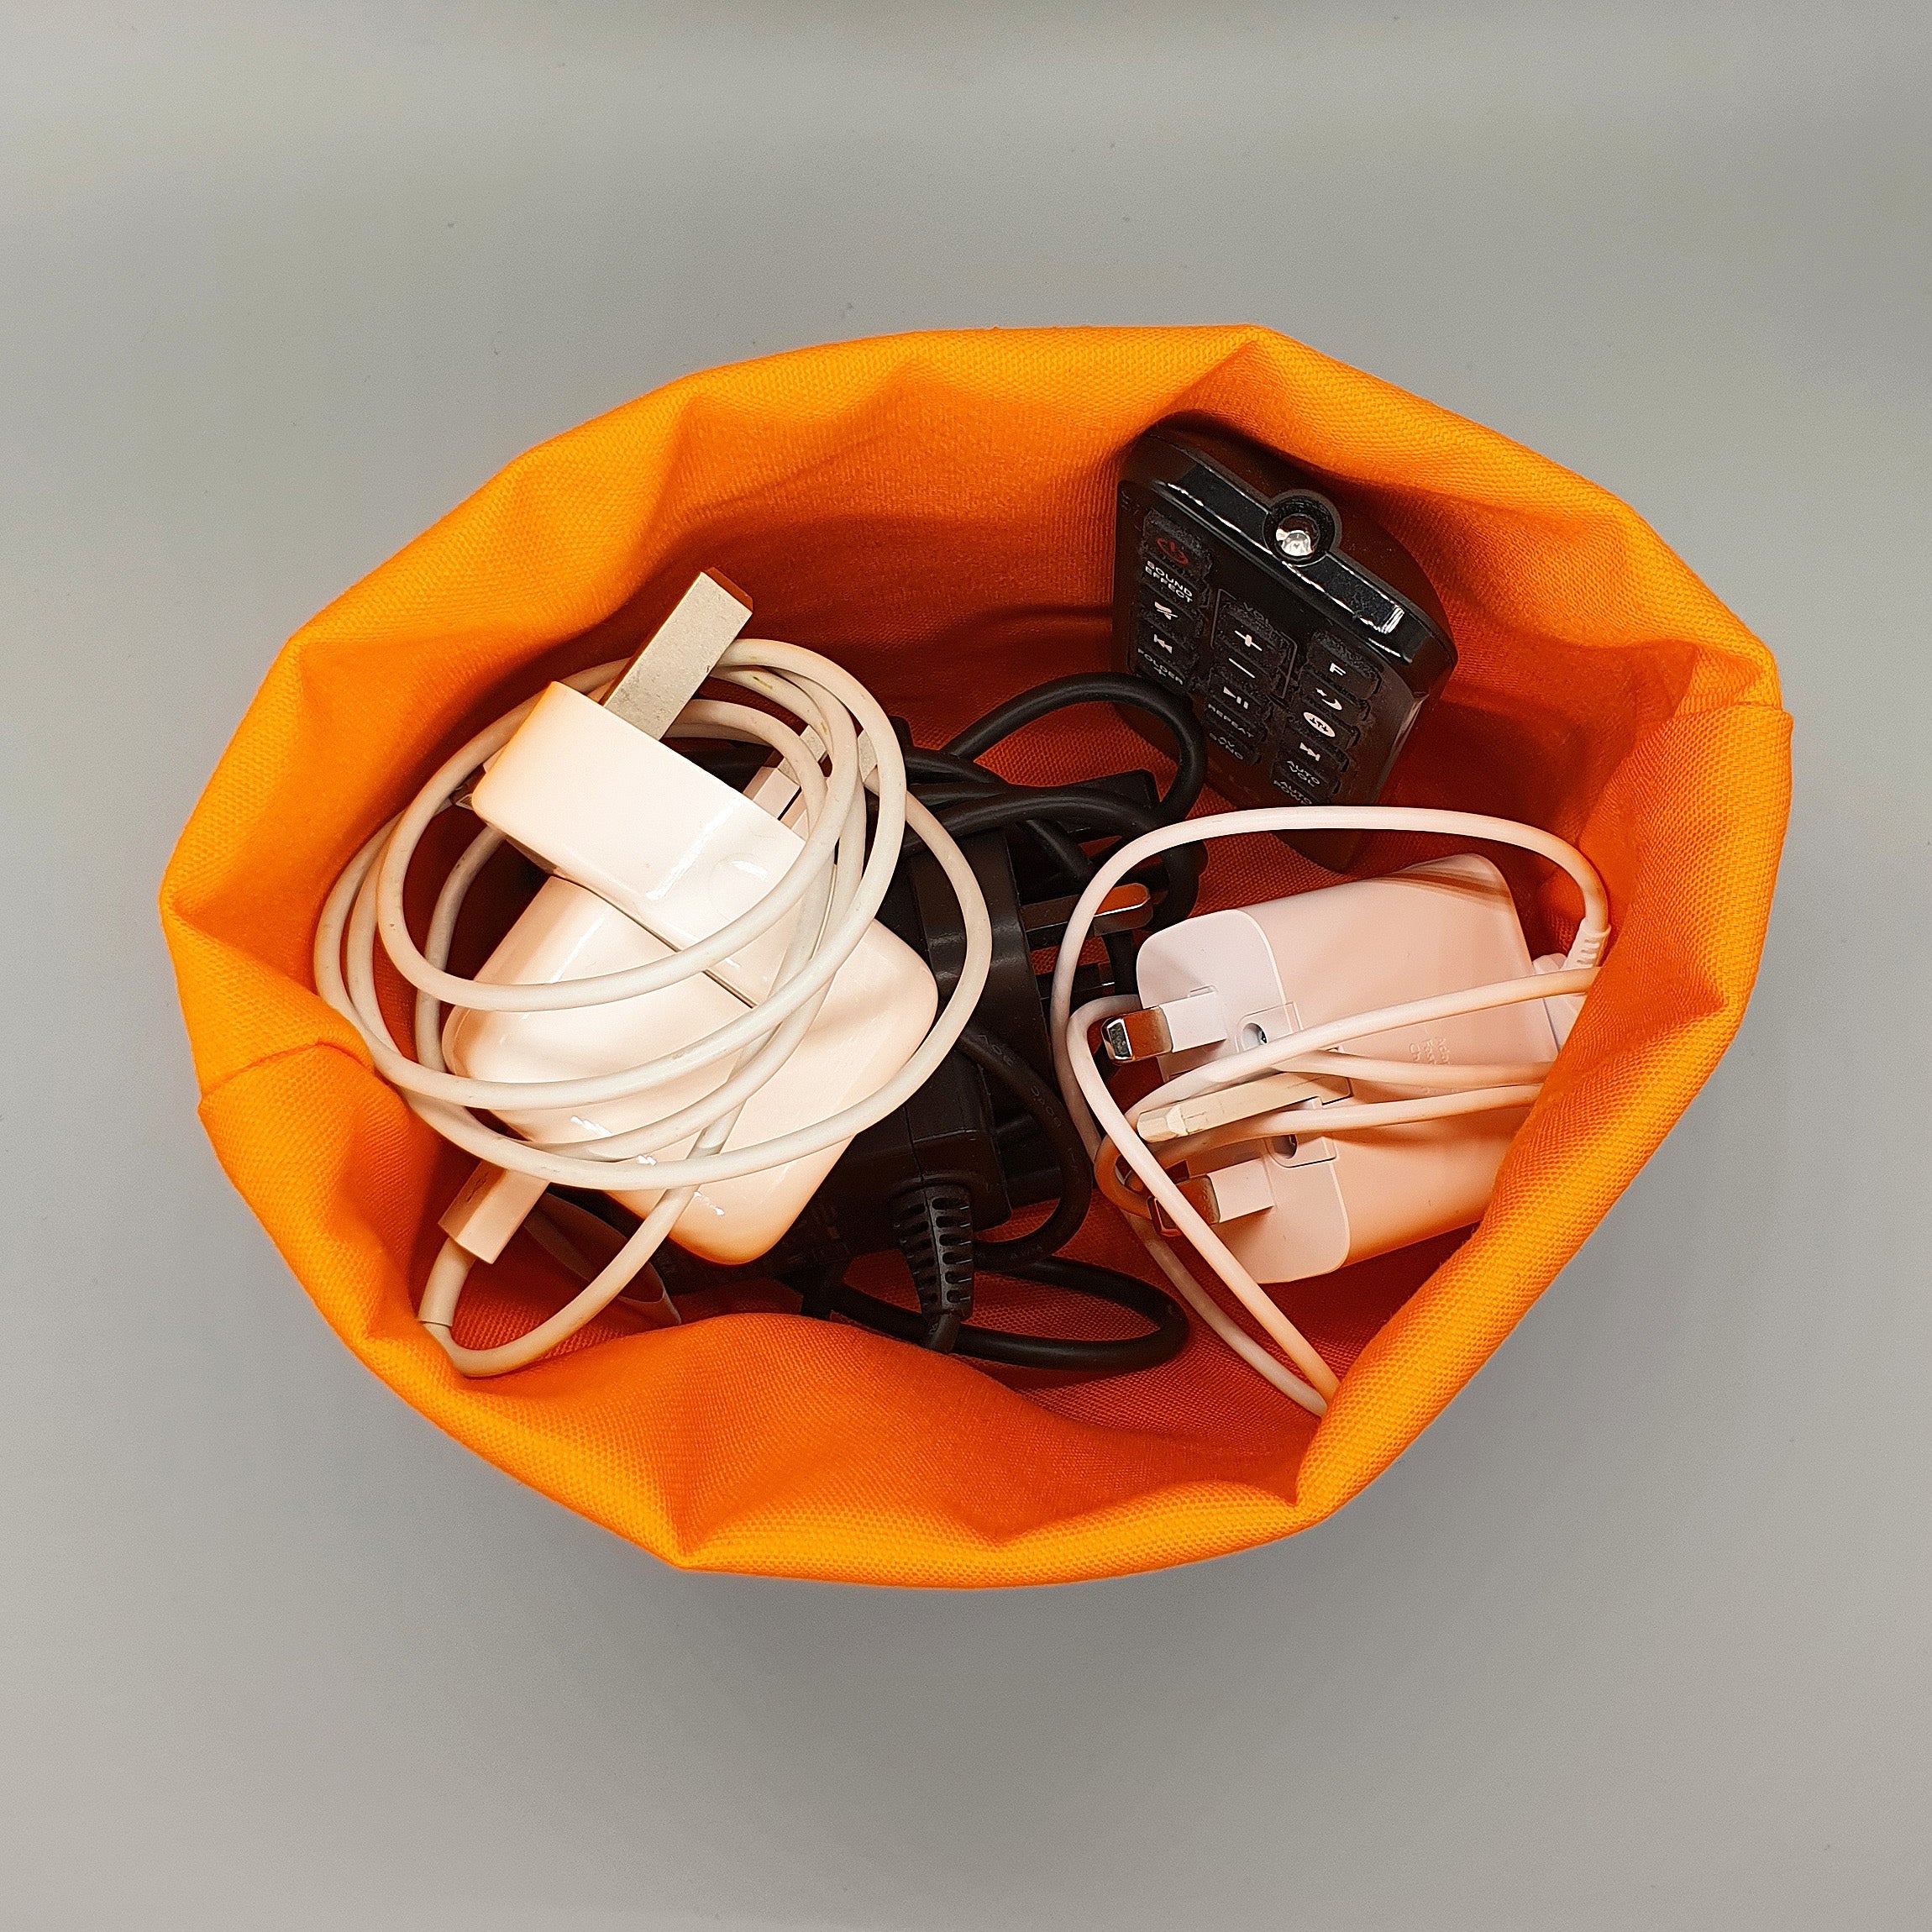 Oystercatcher storage basket with chargers & cables